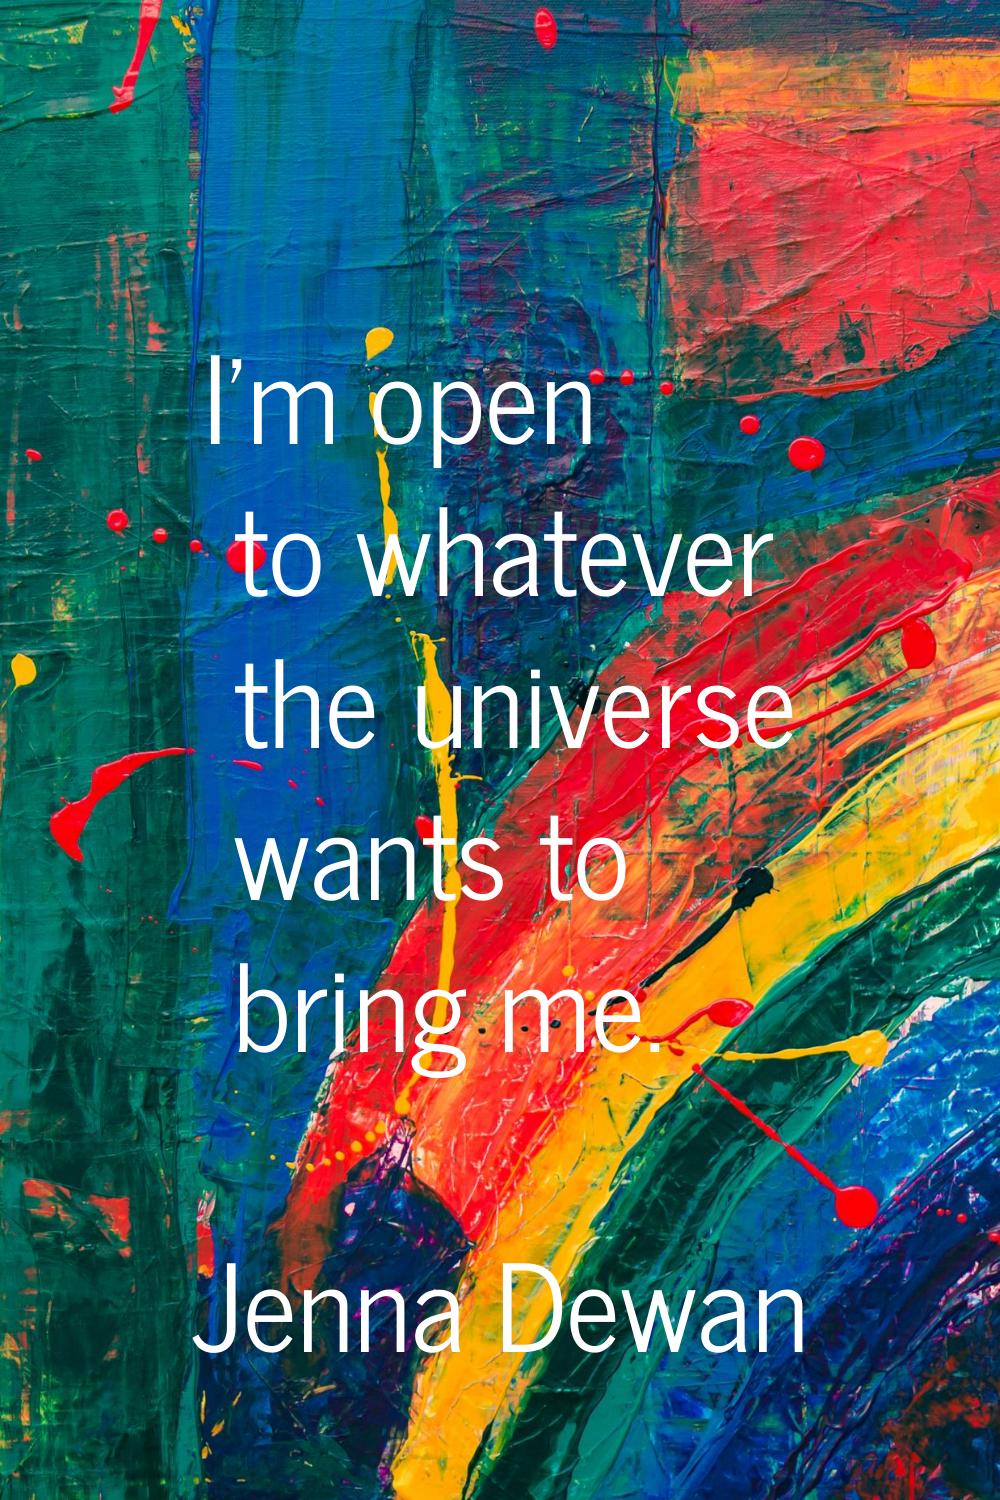 I'm open to whatever the universe wants to bring me.